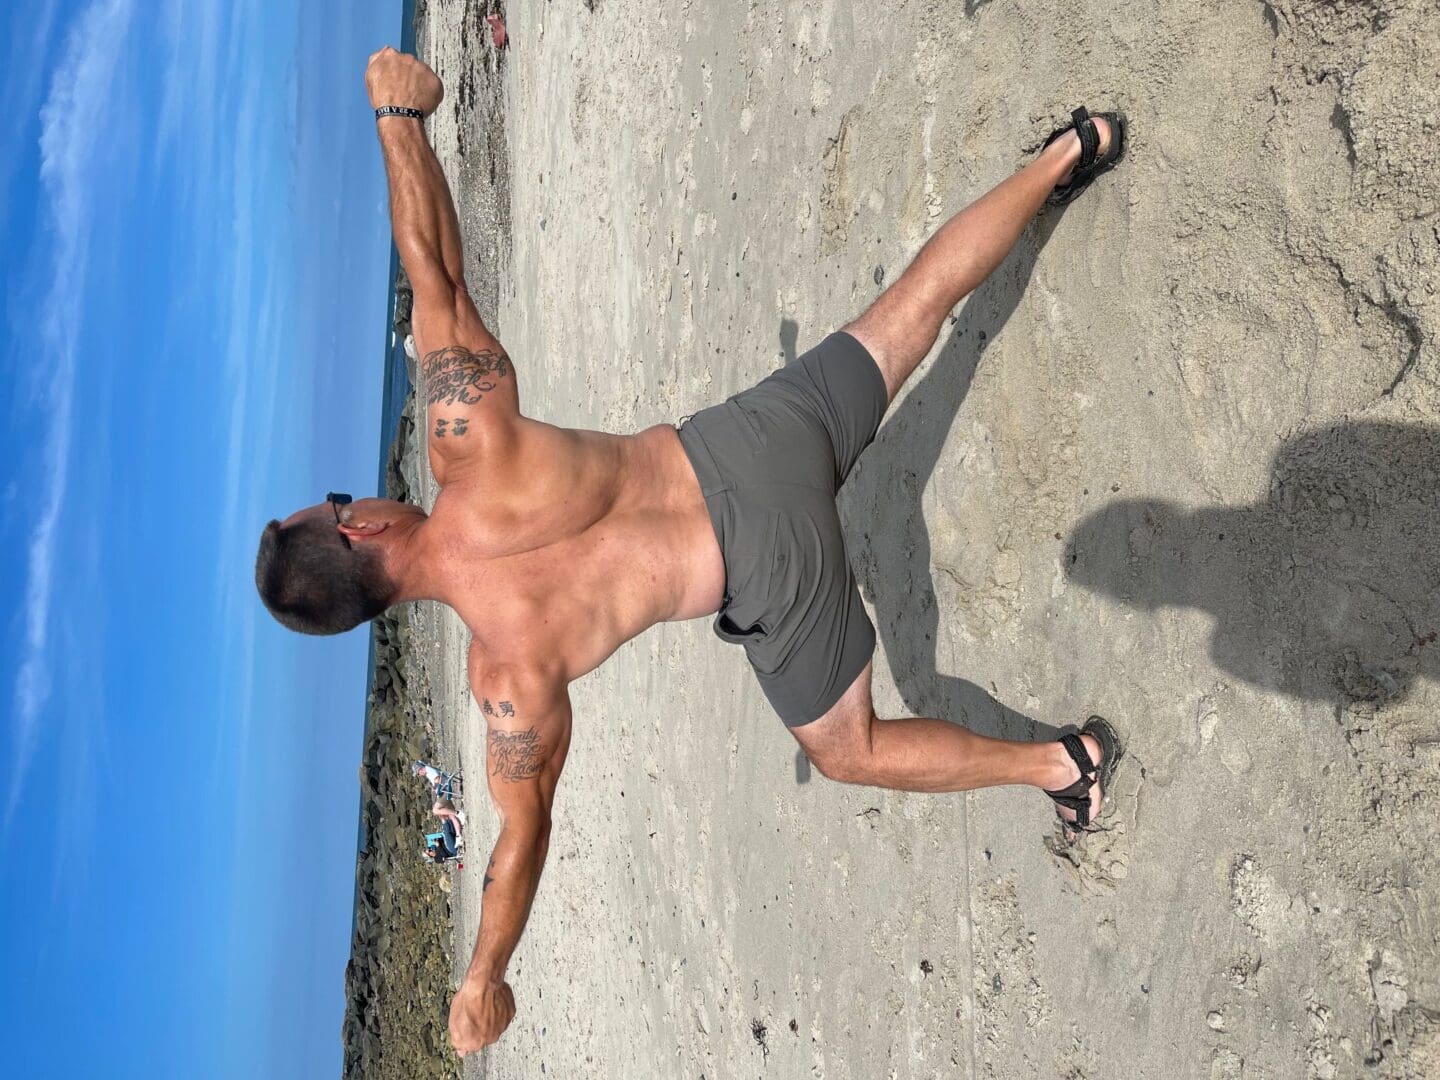 A man doing a fitness yoga pose on the beach.